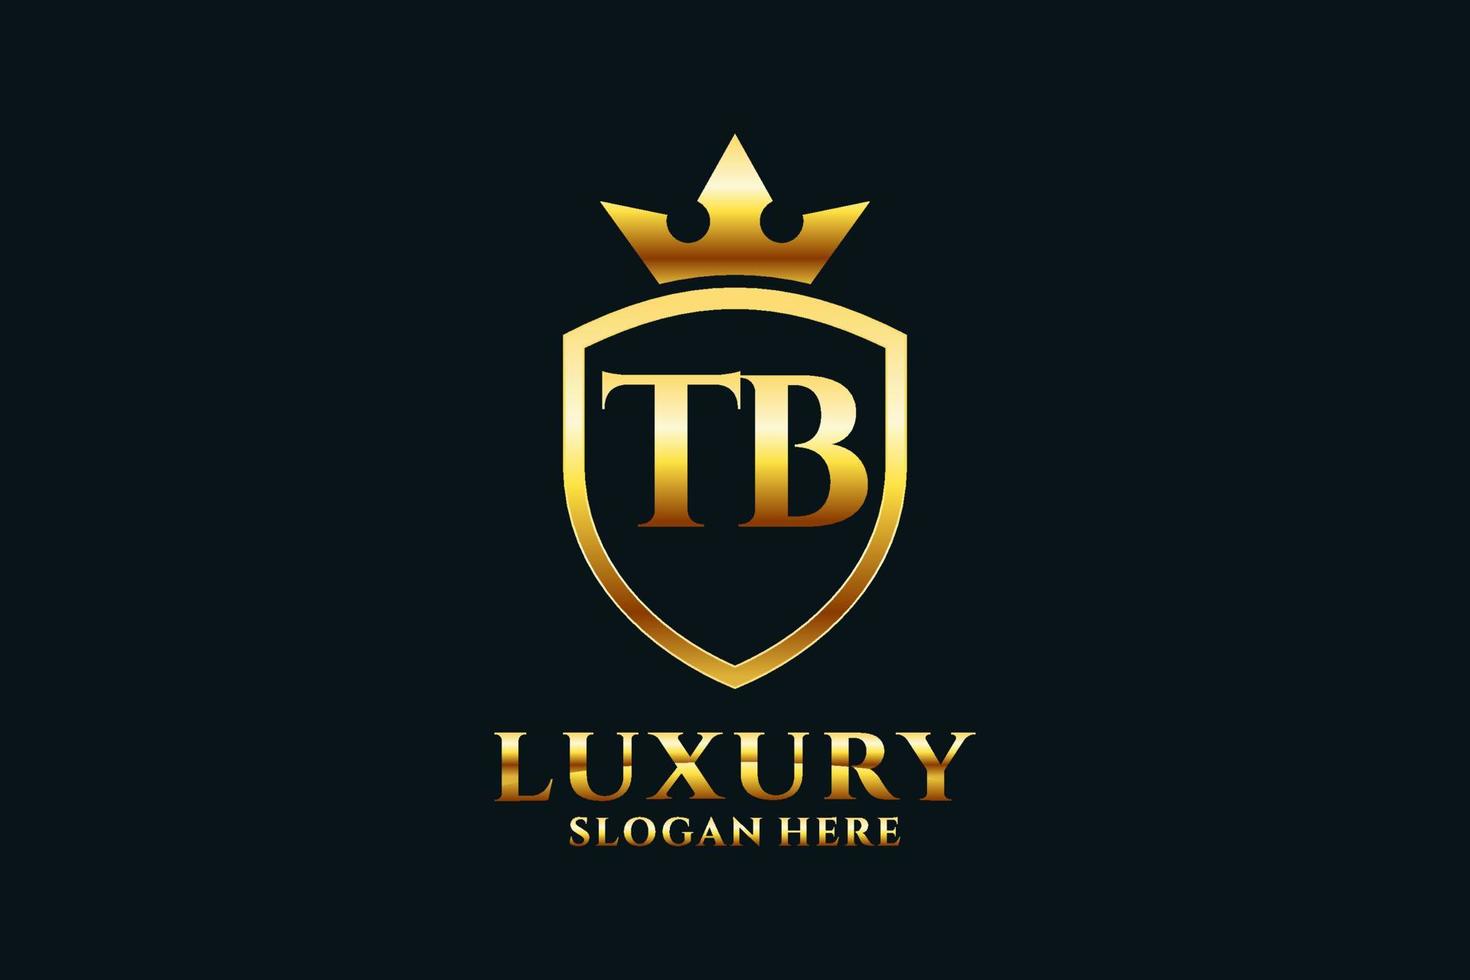 initial TB elegant luxury monogram logo or badge template with scrolls and royal crown - perfect for luxurious branding projects vector